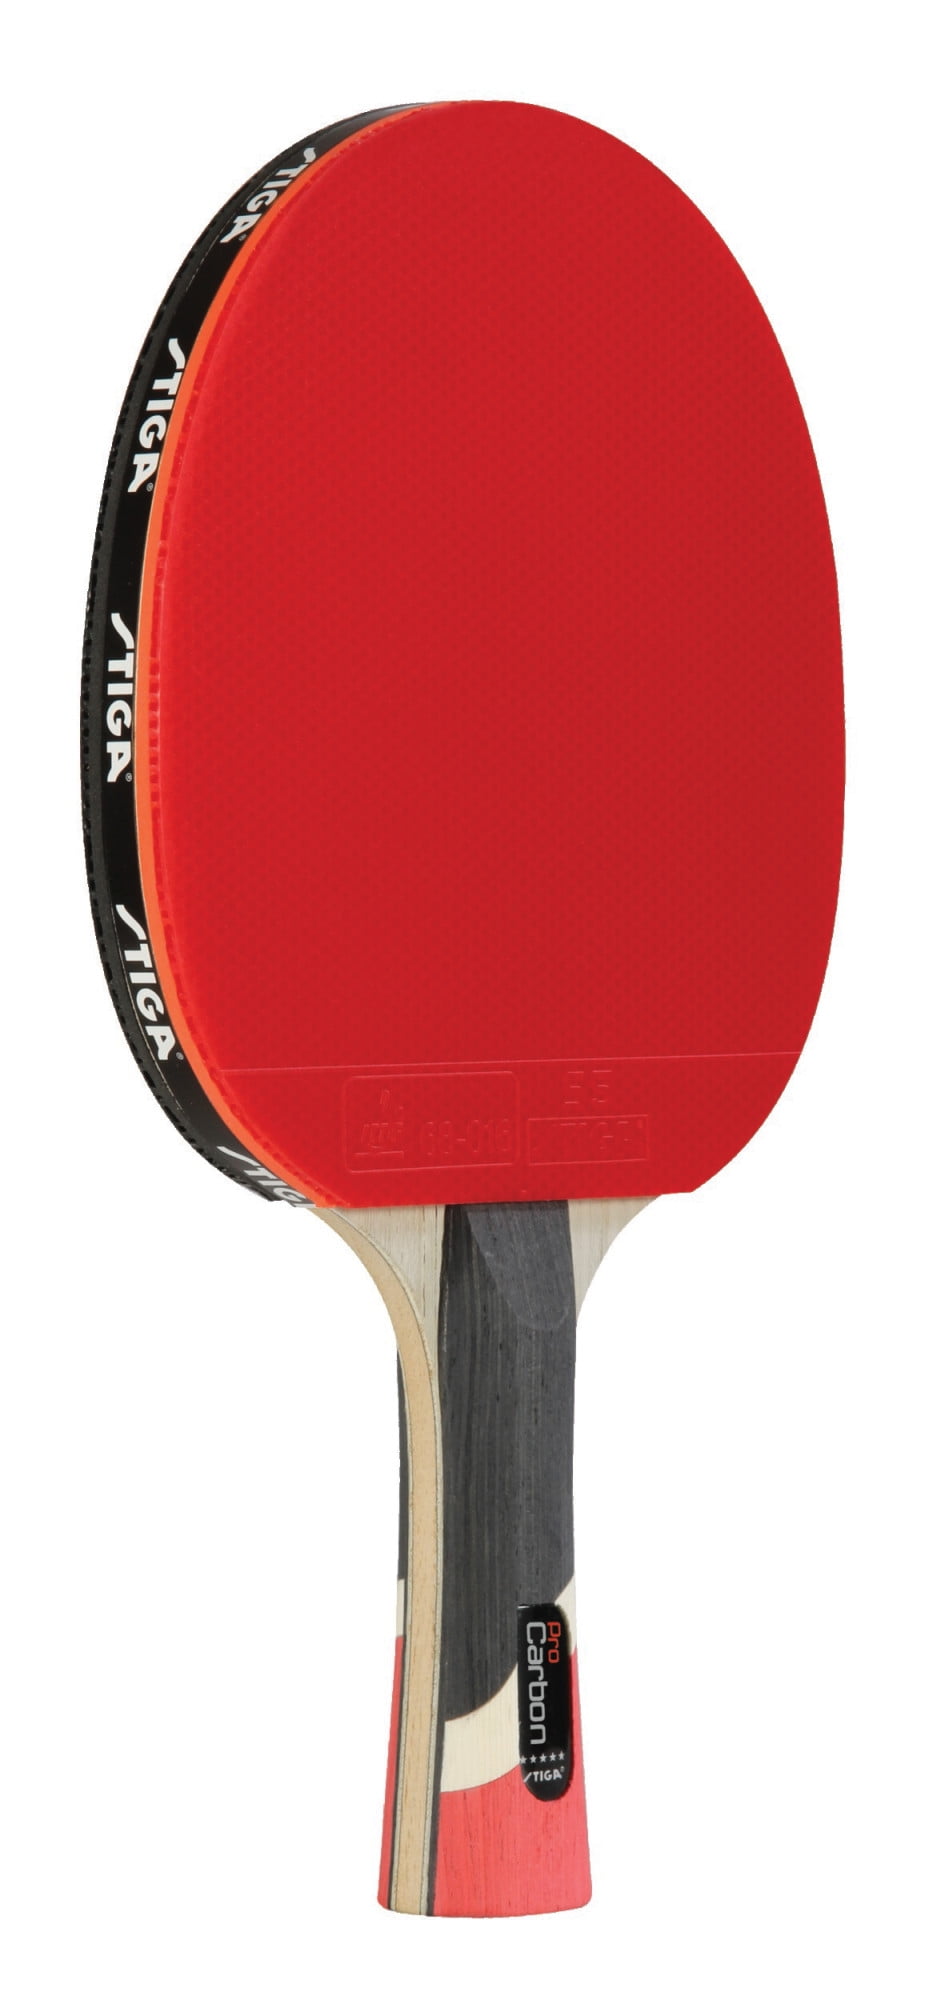 STIGA Pro Carbon Performance-Level Table Tennis Racket with Carbon Technology 